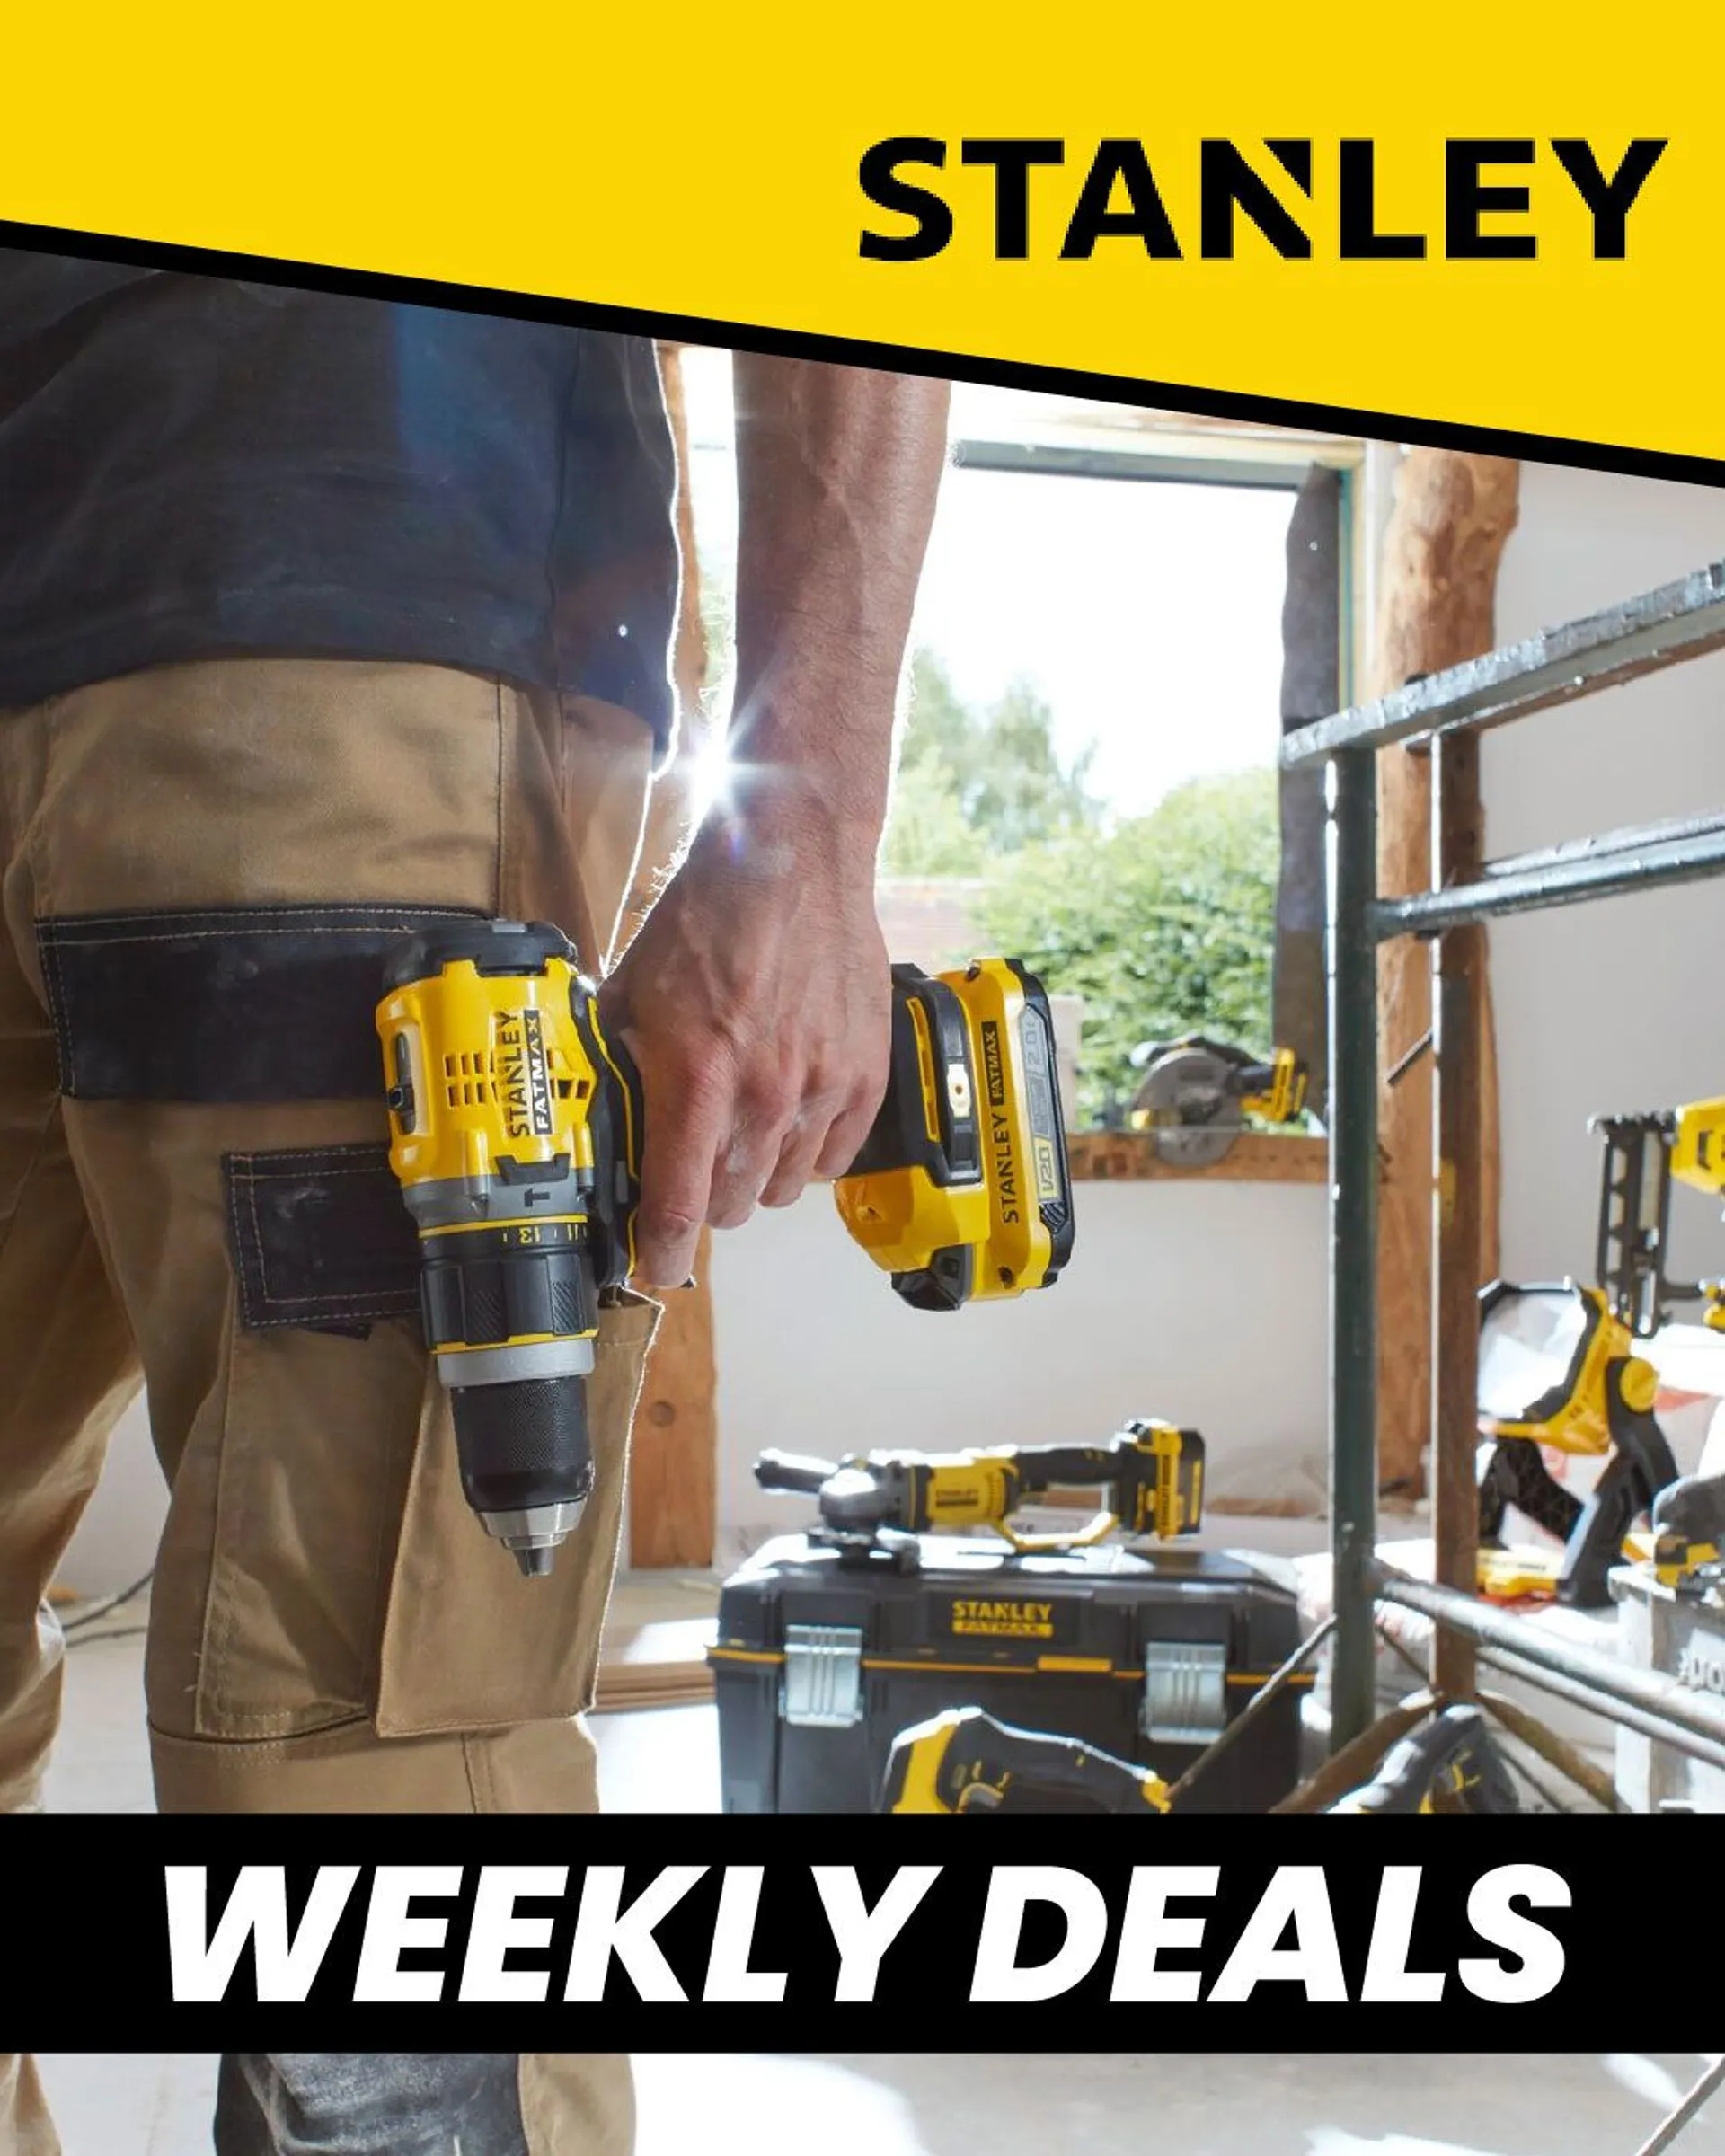 Weekly ad Stanley - Weekly Deals  from January 28 to February 2 2023 - Page 1